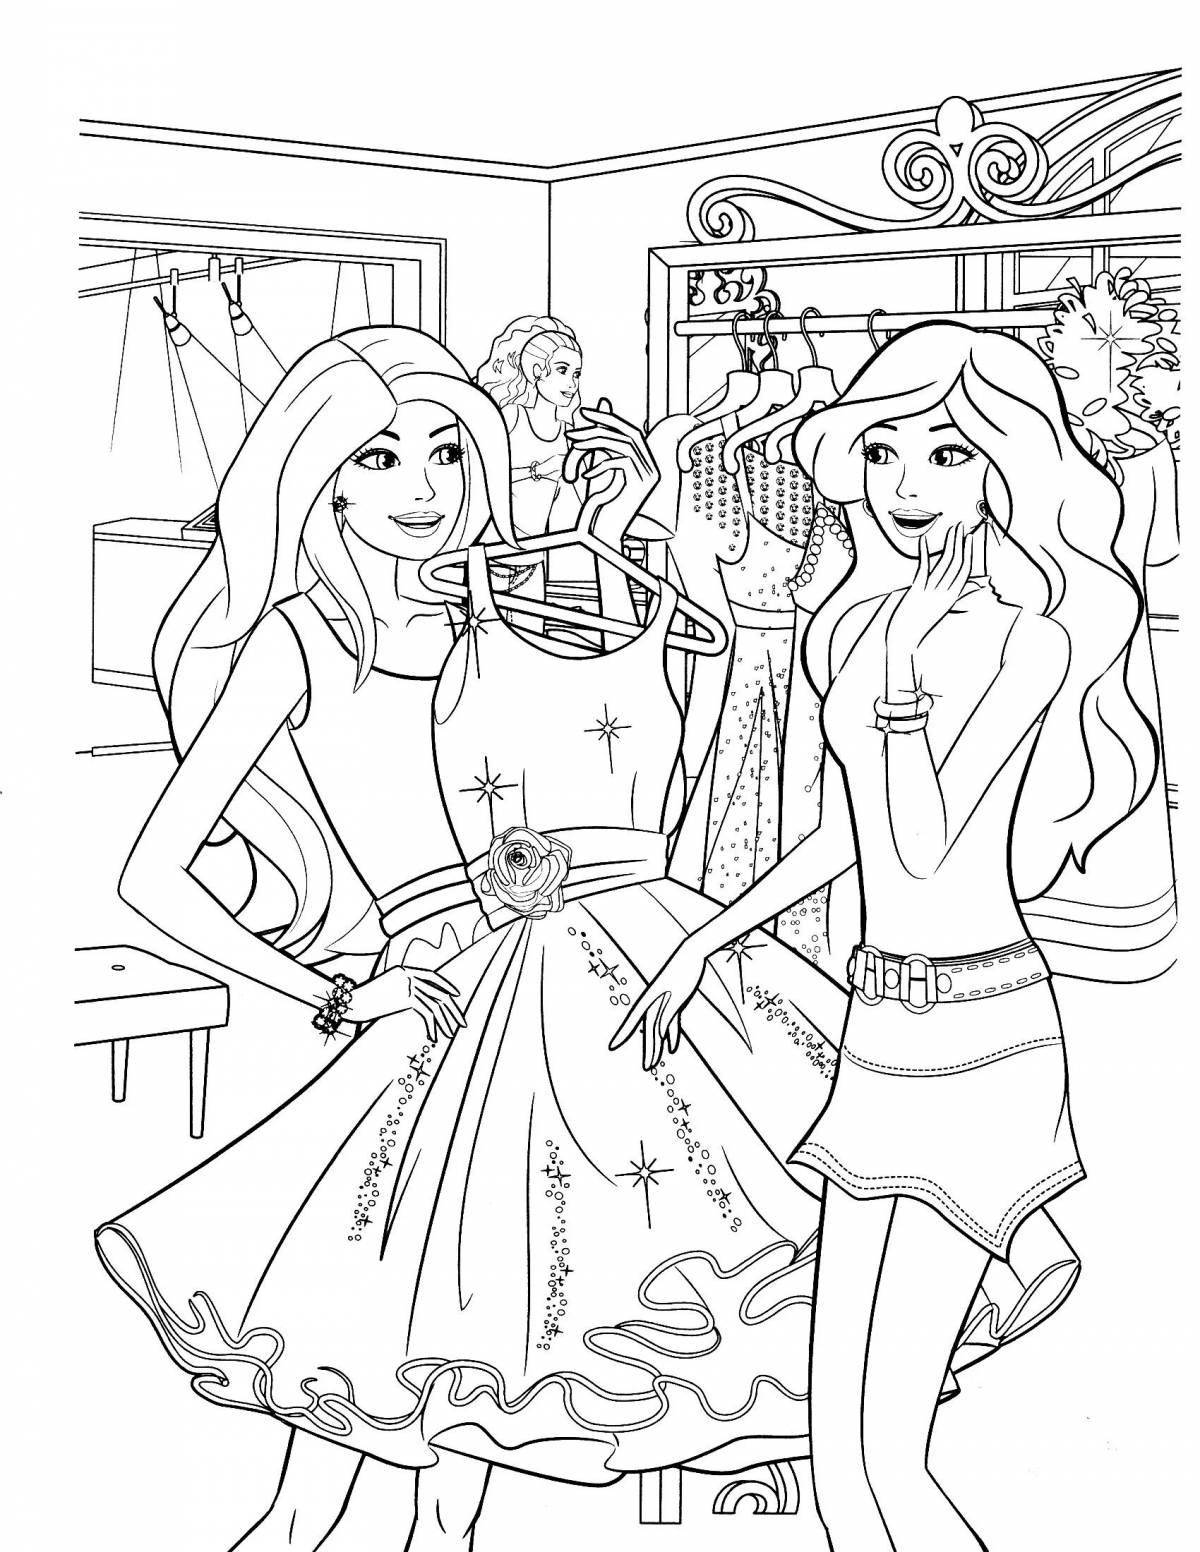 Barbie coloring book for kids 5-6 years old